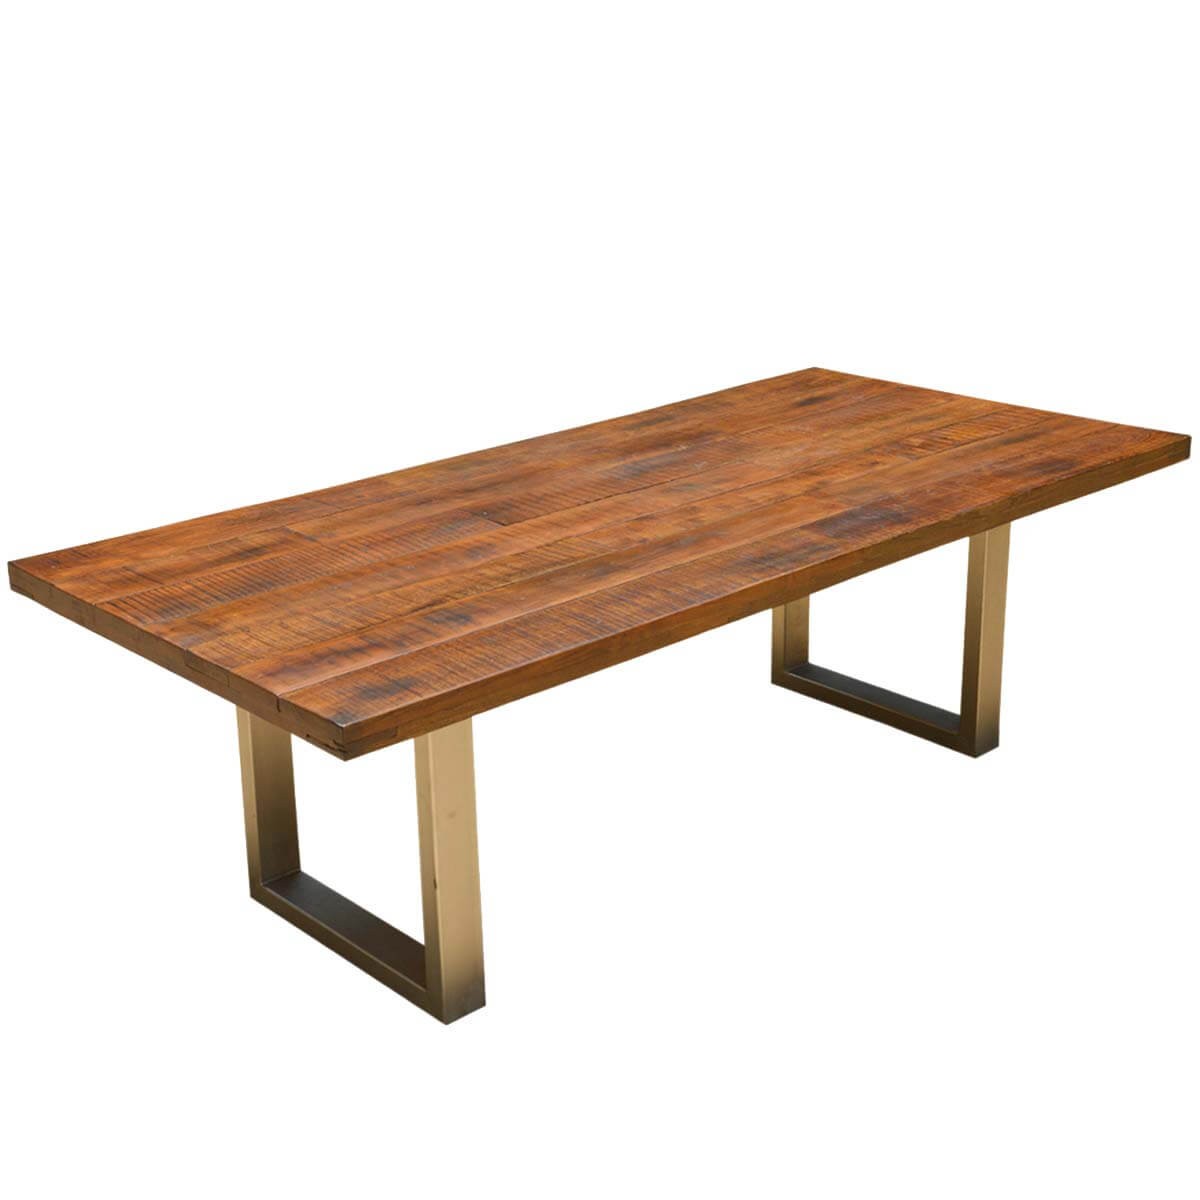 Rustic wood and metal dining table 5